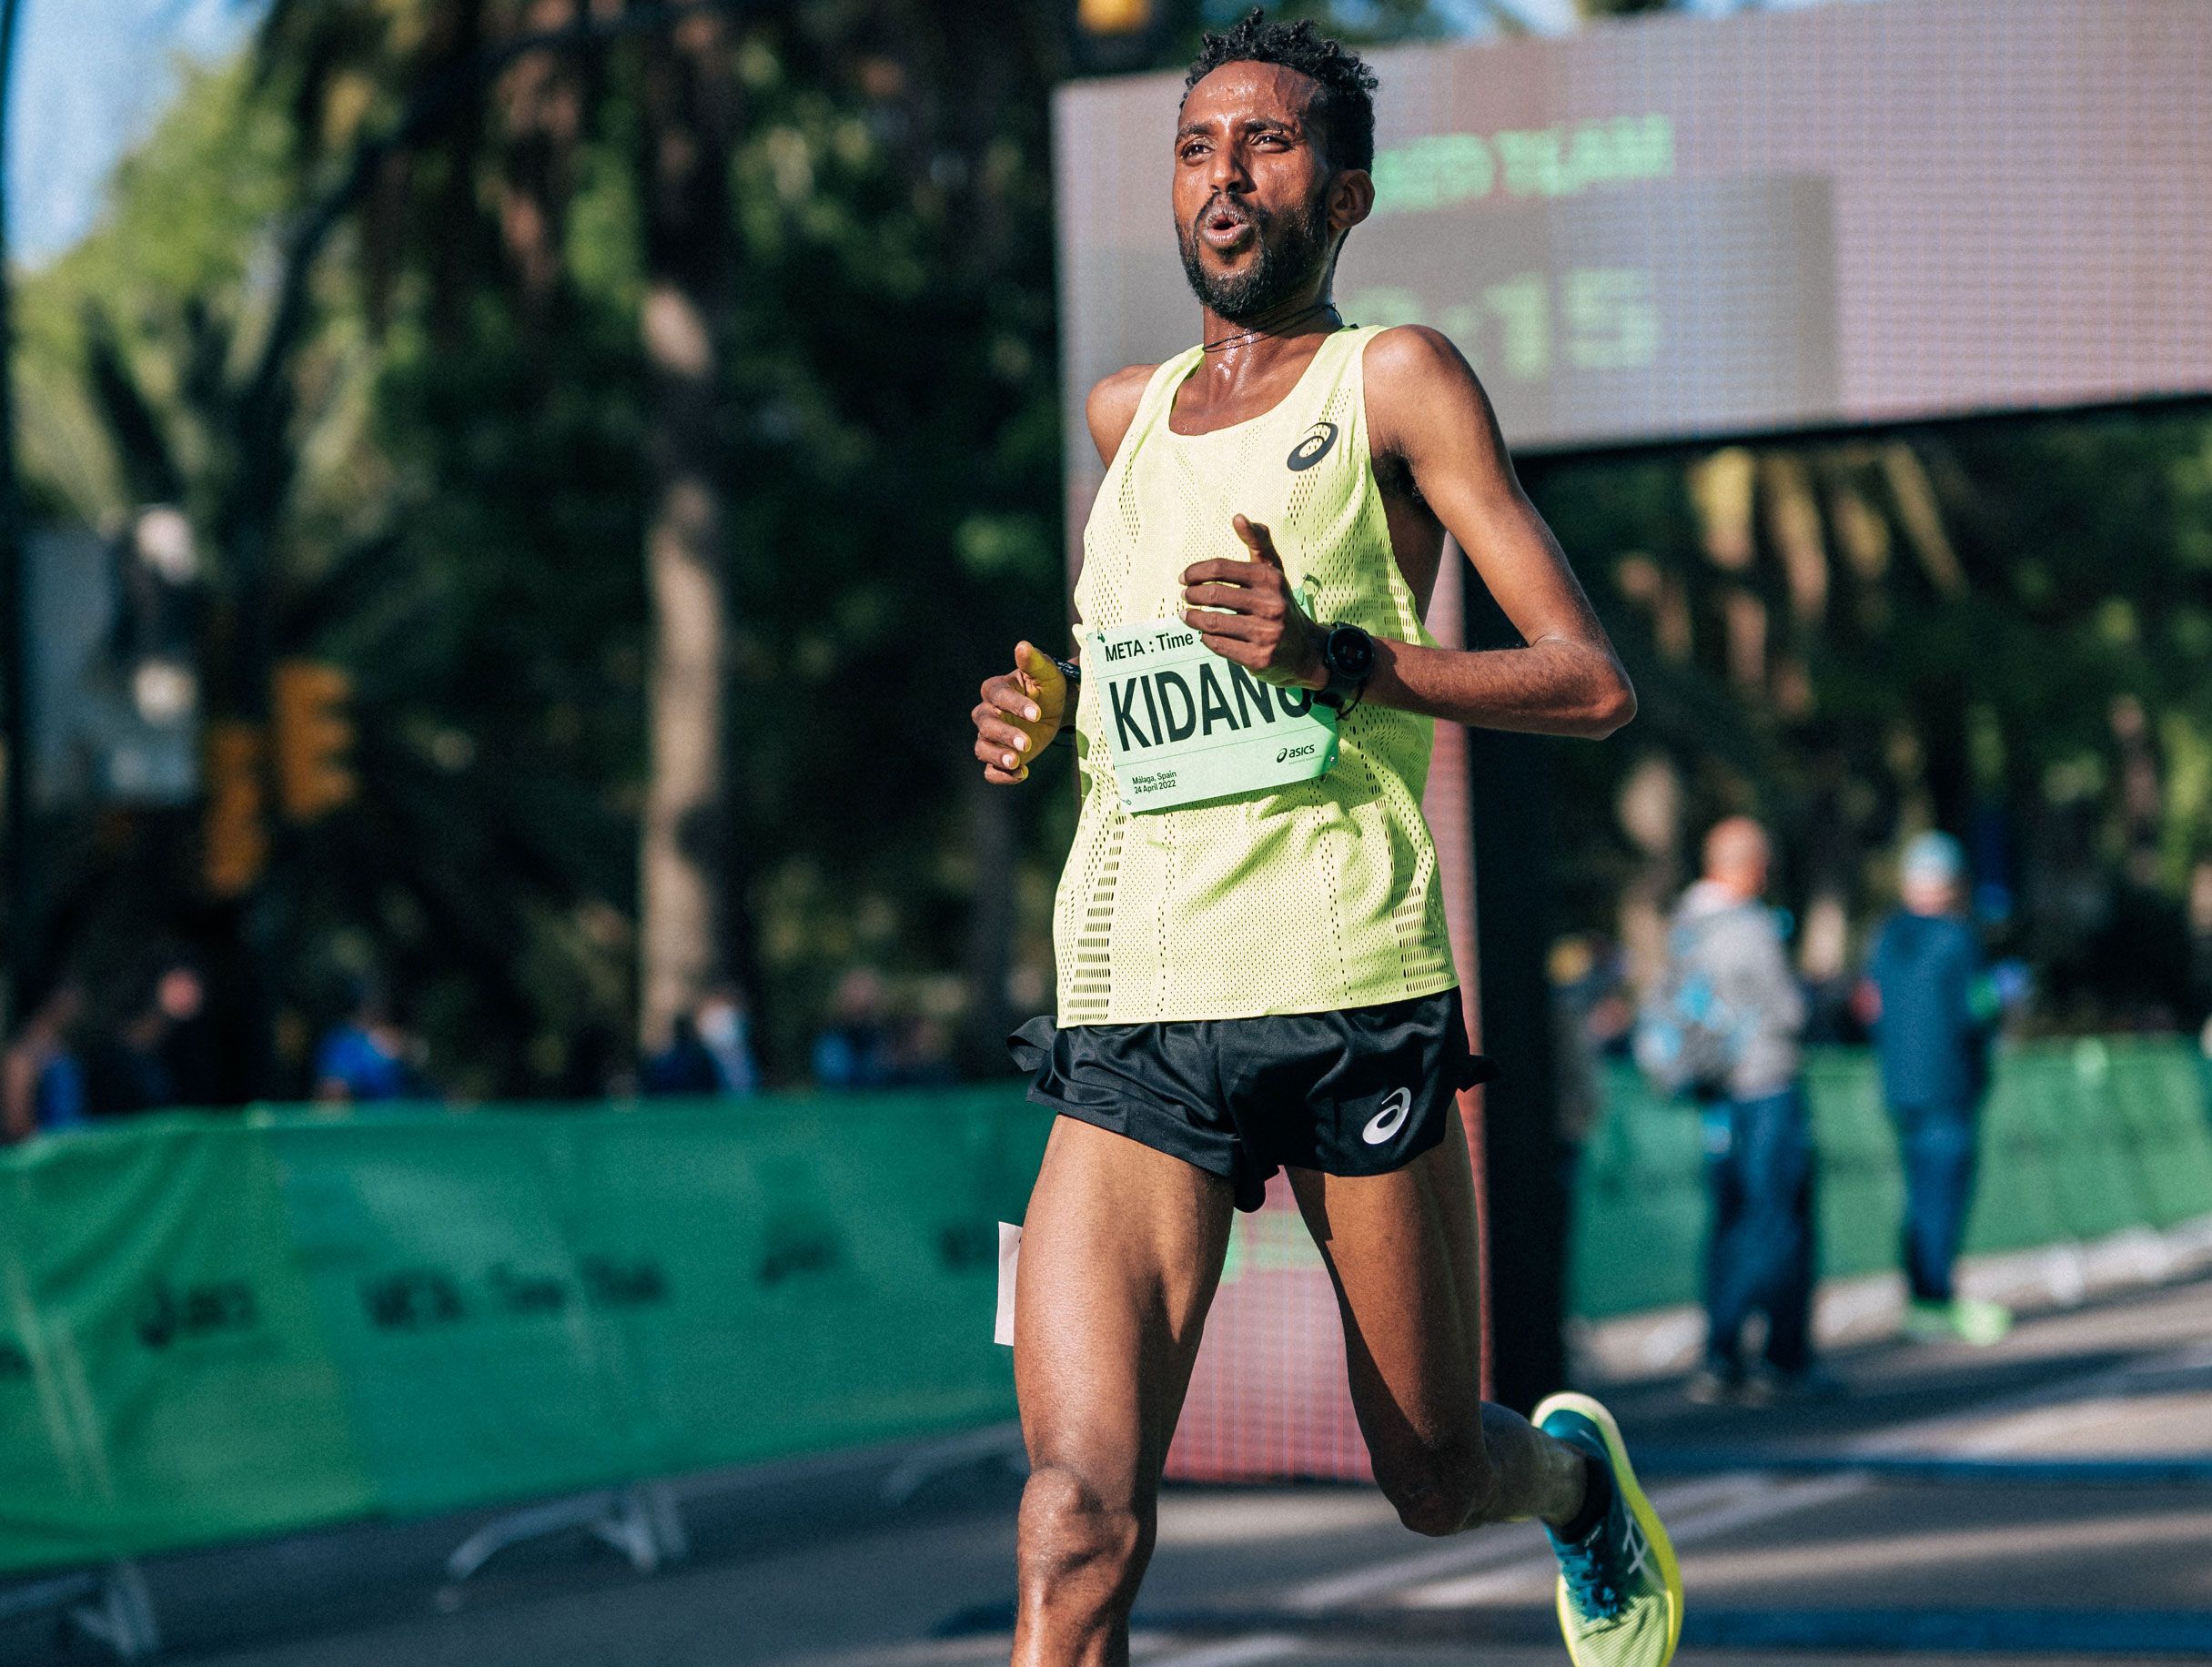 Tsegay Kidanu wins the 10km at the META: TIME : TRIALS by ASICS 